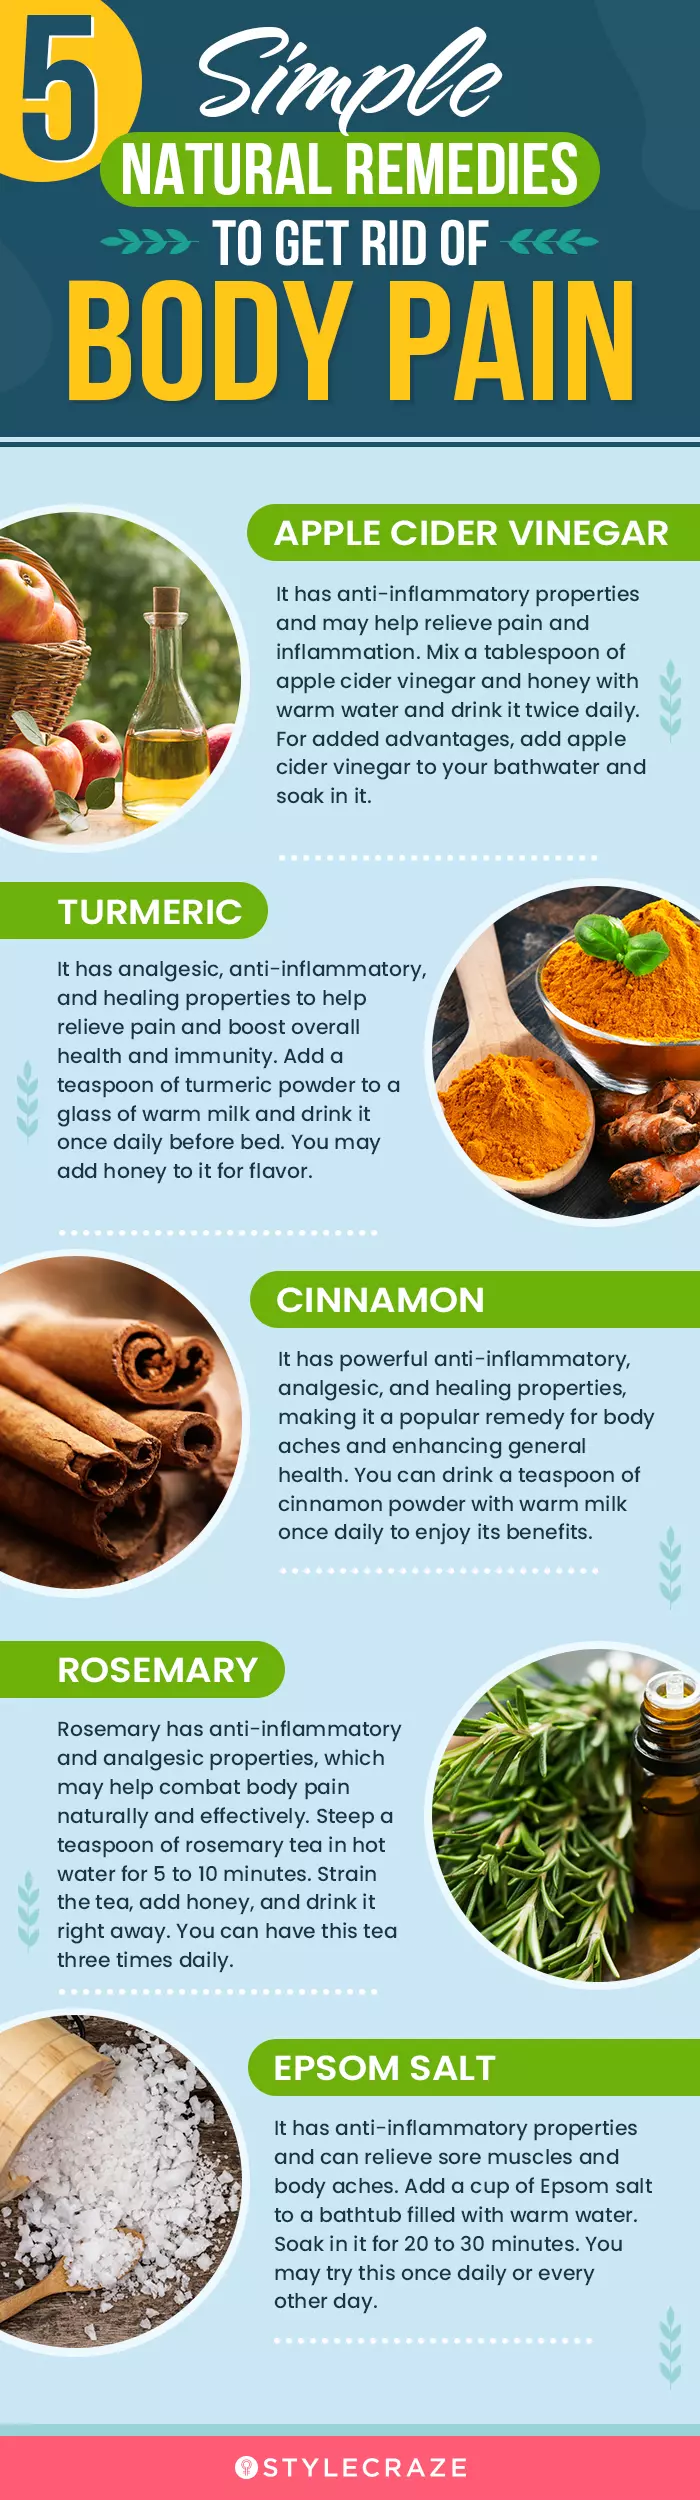 5 simple natural remedies to get rid of body pain (infographic)